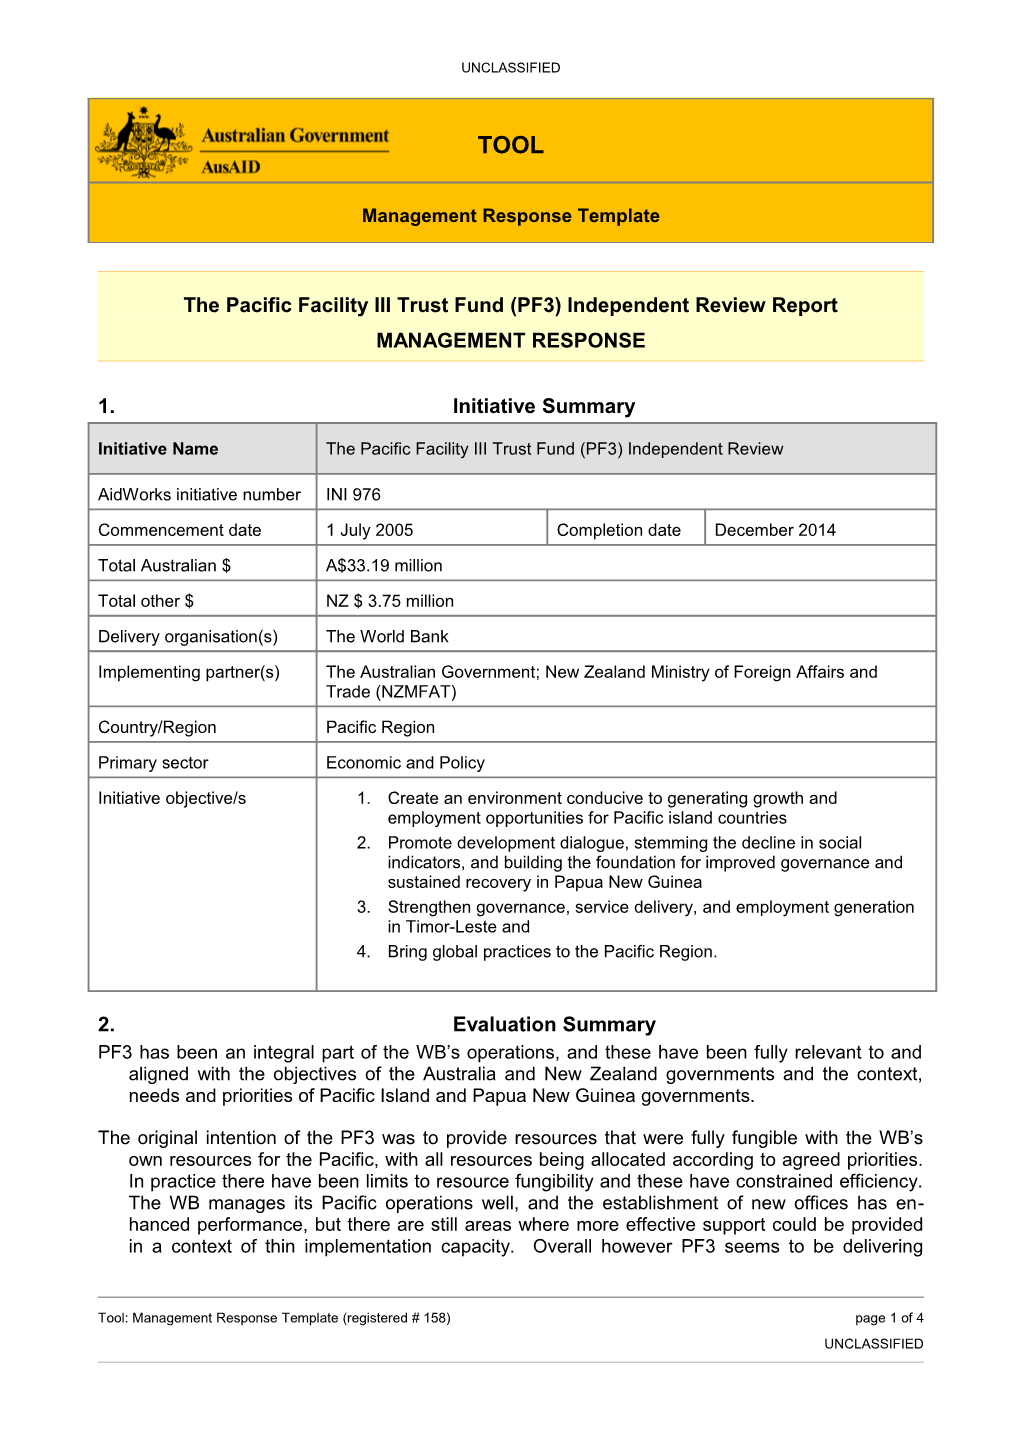 The Pacific Facility III Trust Fund (PF3) Independent Review Report